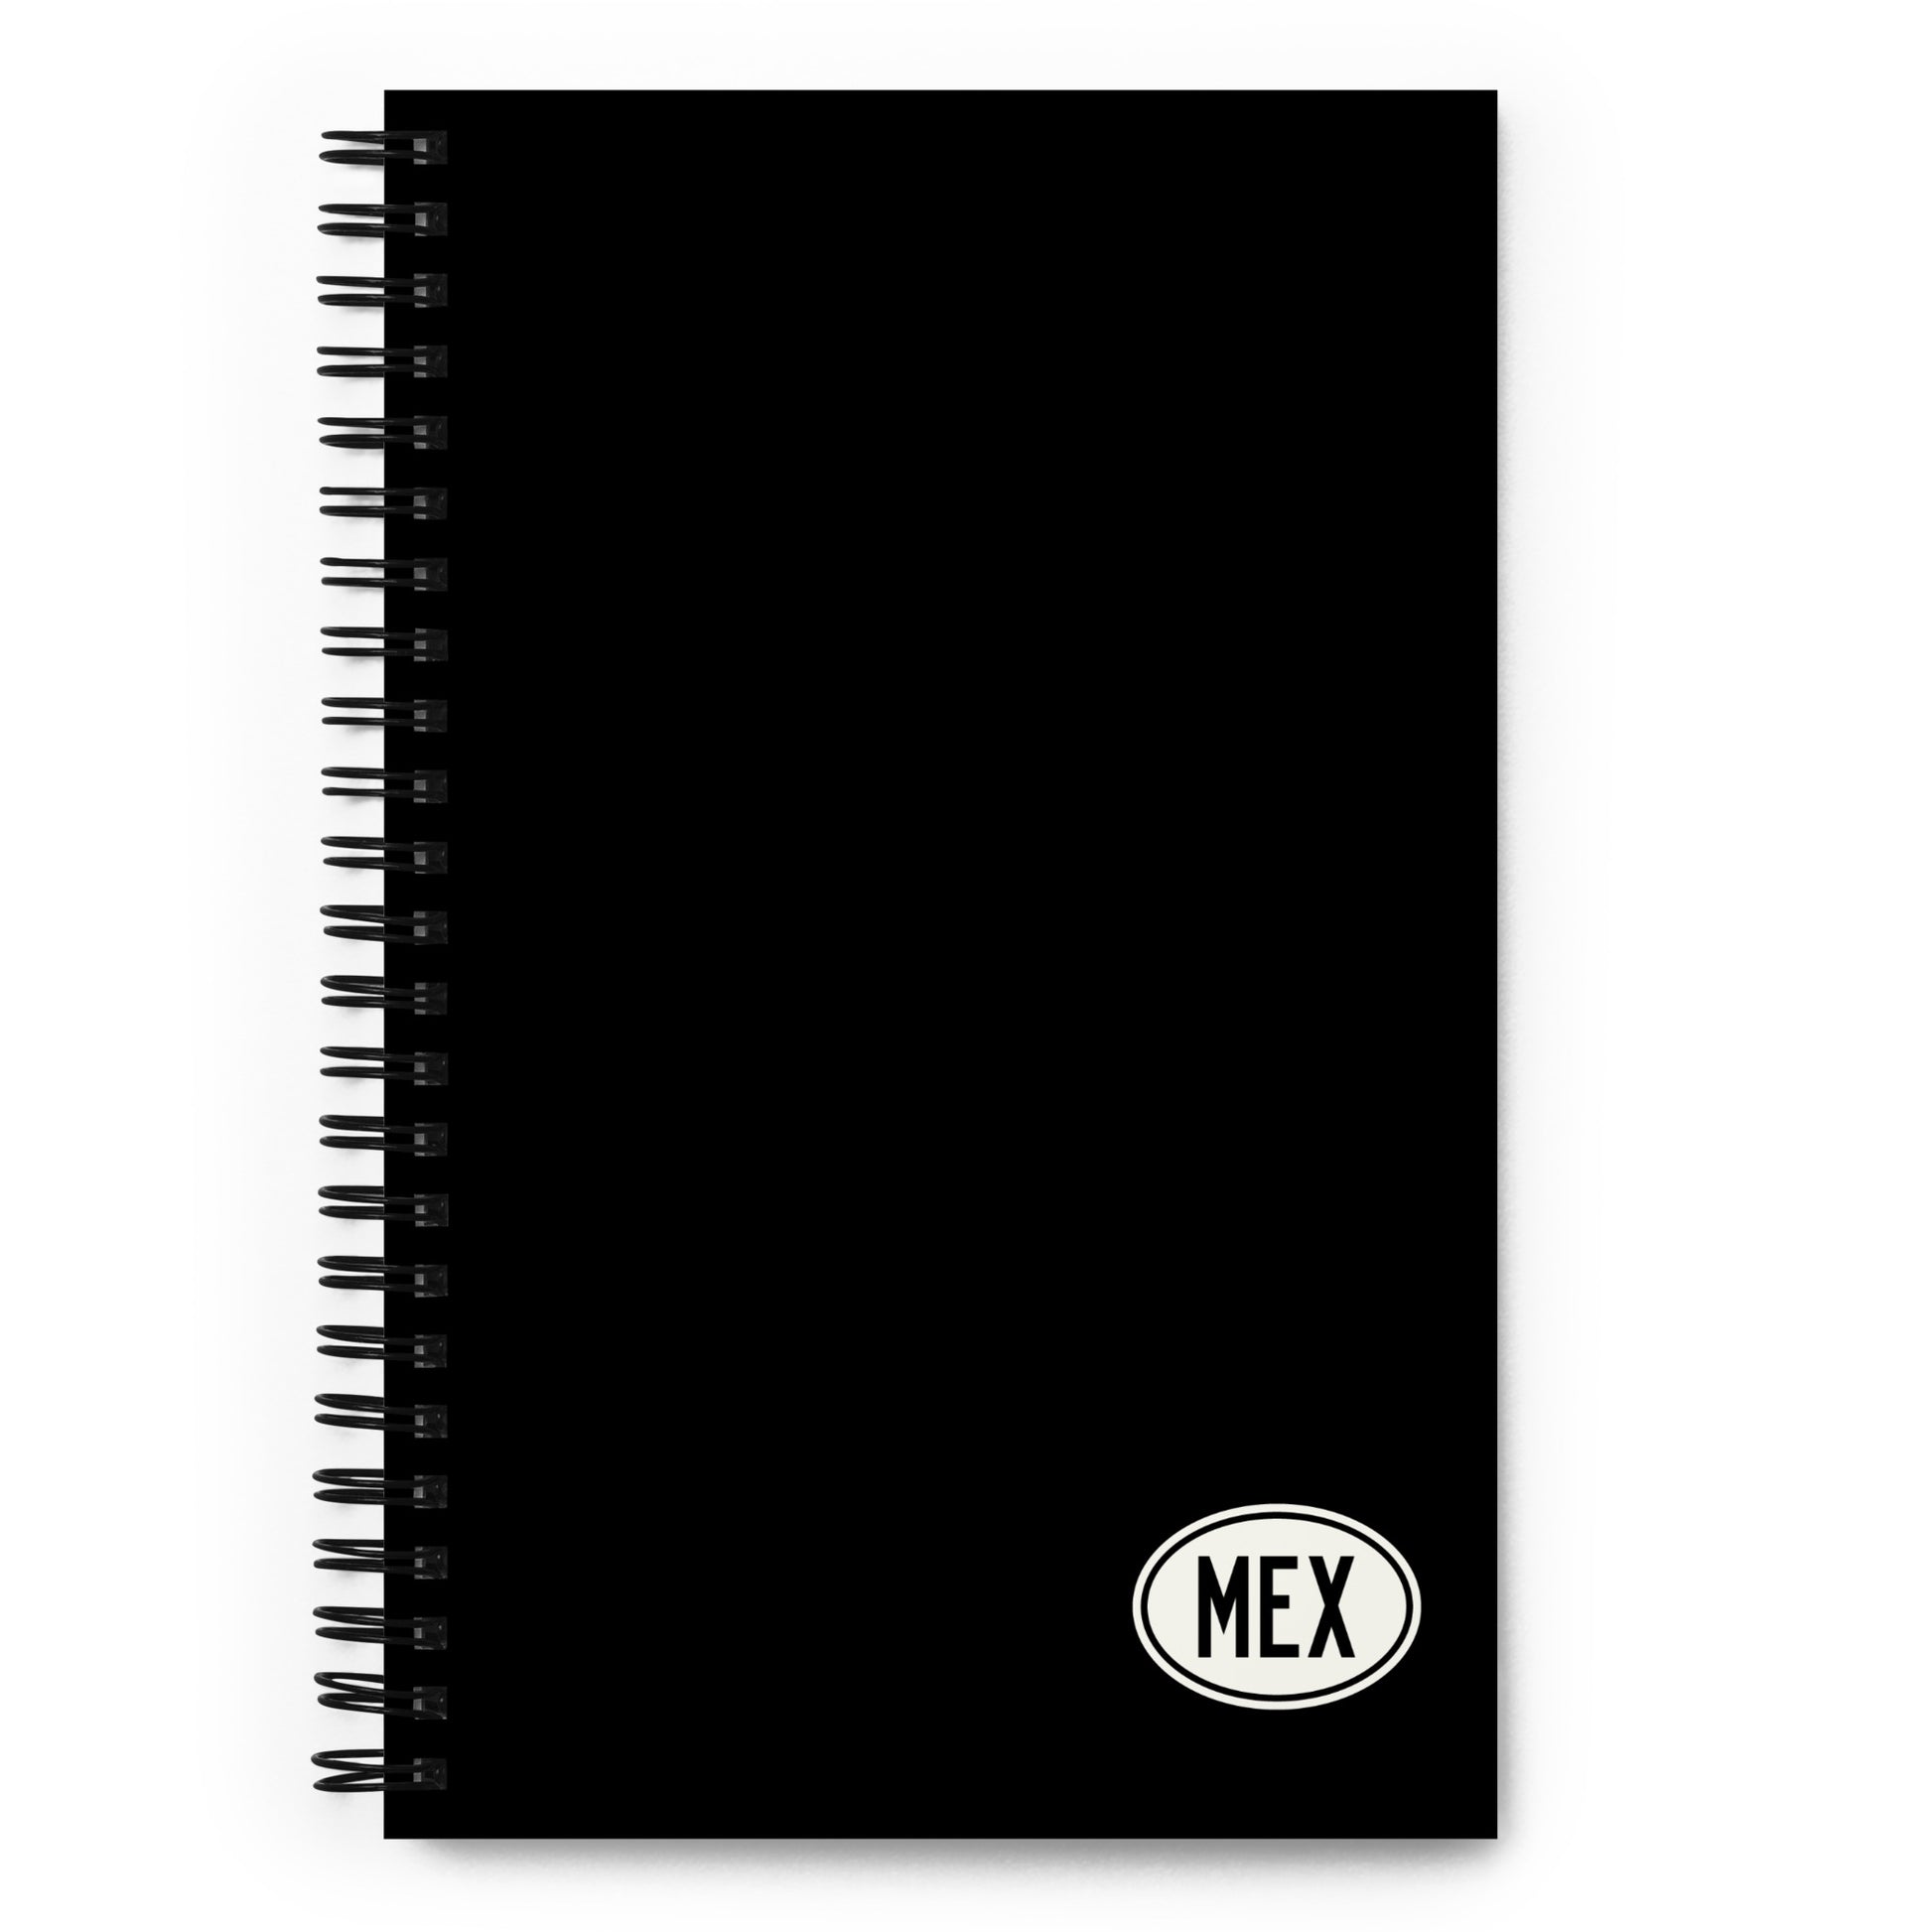 Unique Travel Gift Spiral Notebook - White Oval • MEX Mexico City • YHM Designs - Image 01